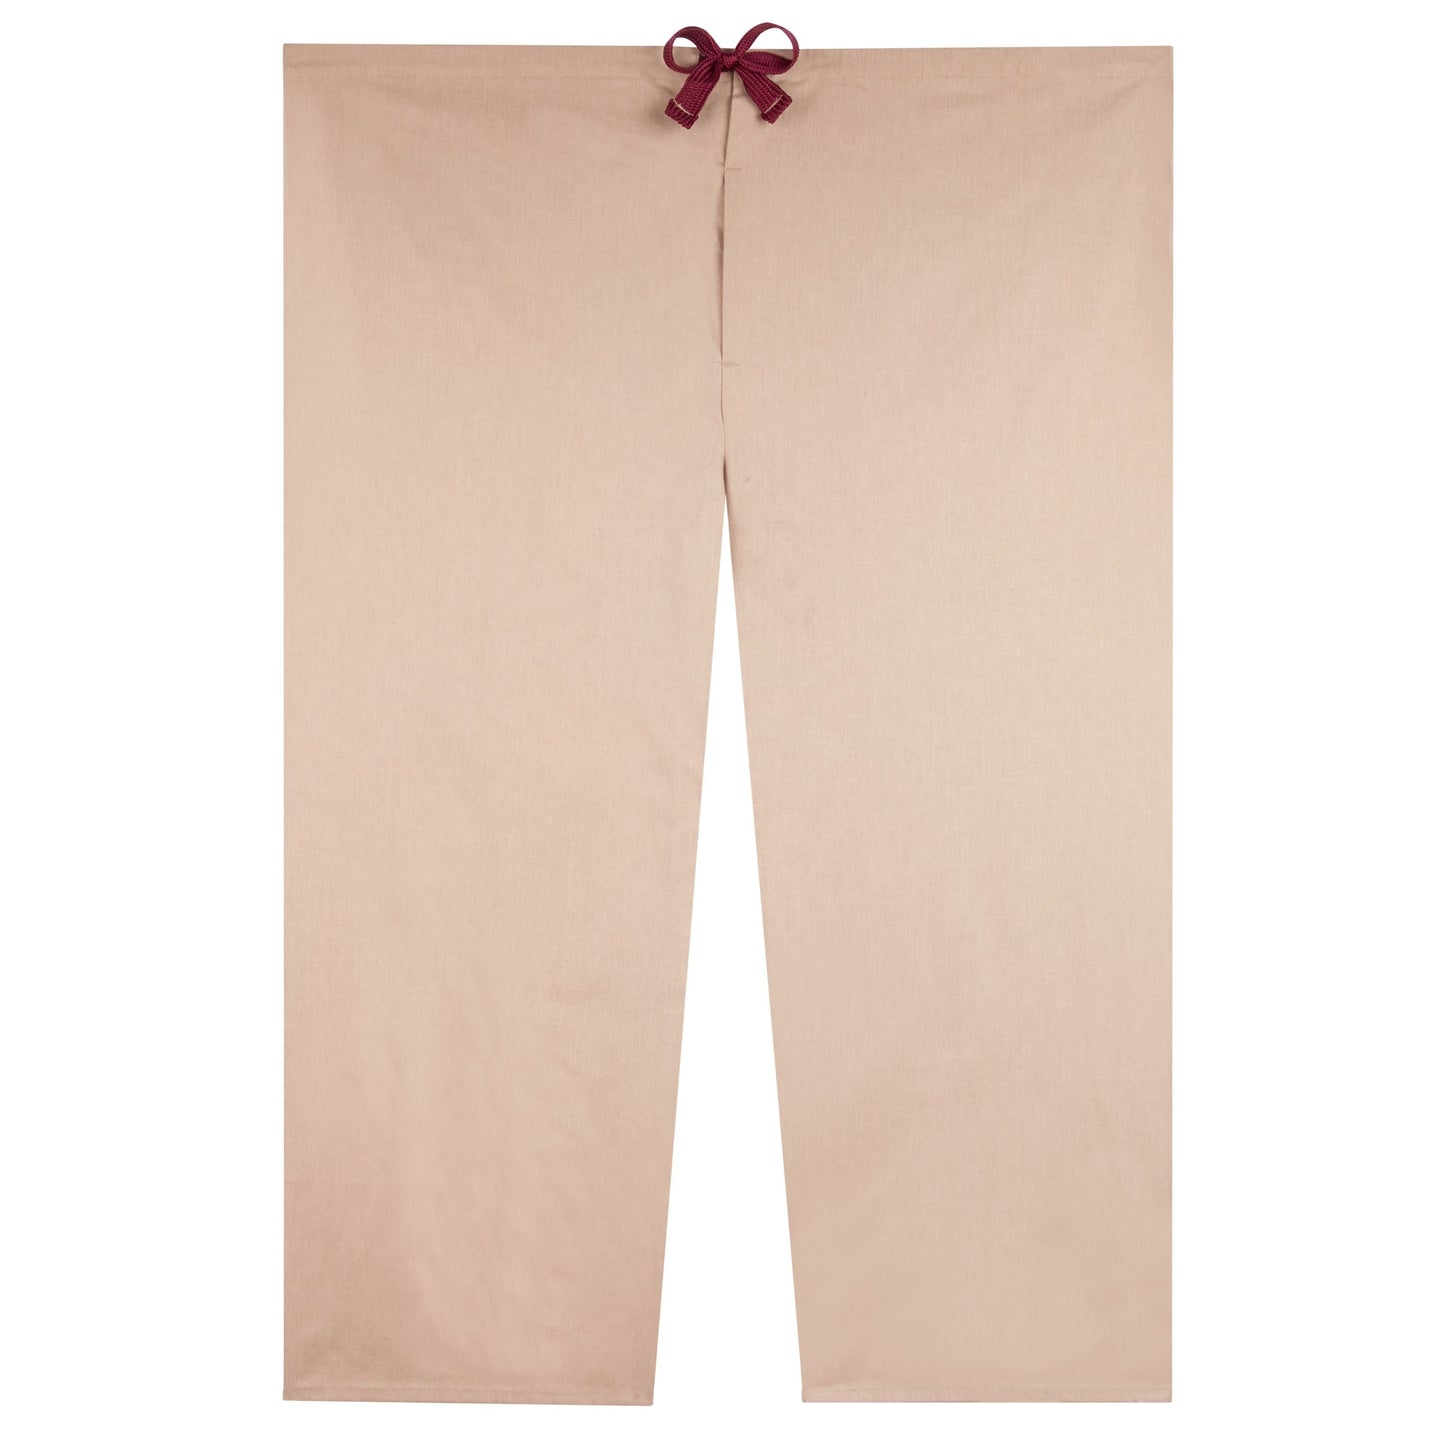 American Dawn | Tan With Red Tie 2X-Large Pajama Pant With Drawstring Closure